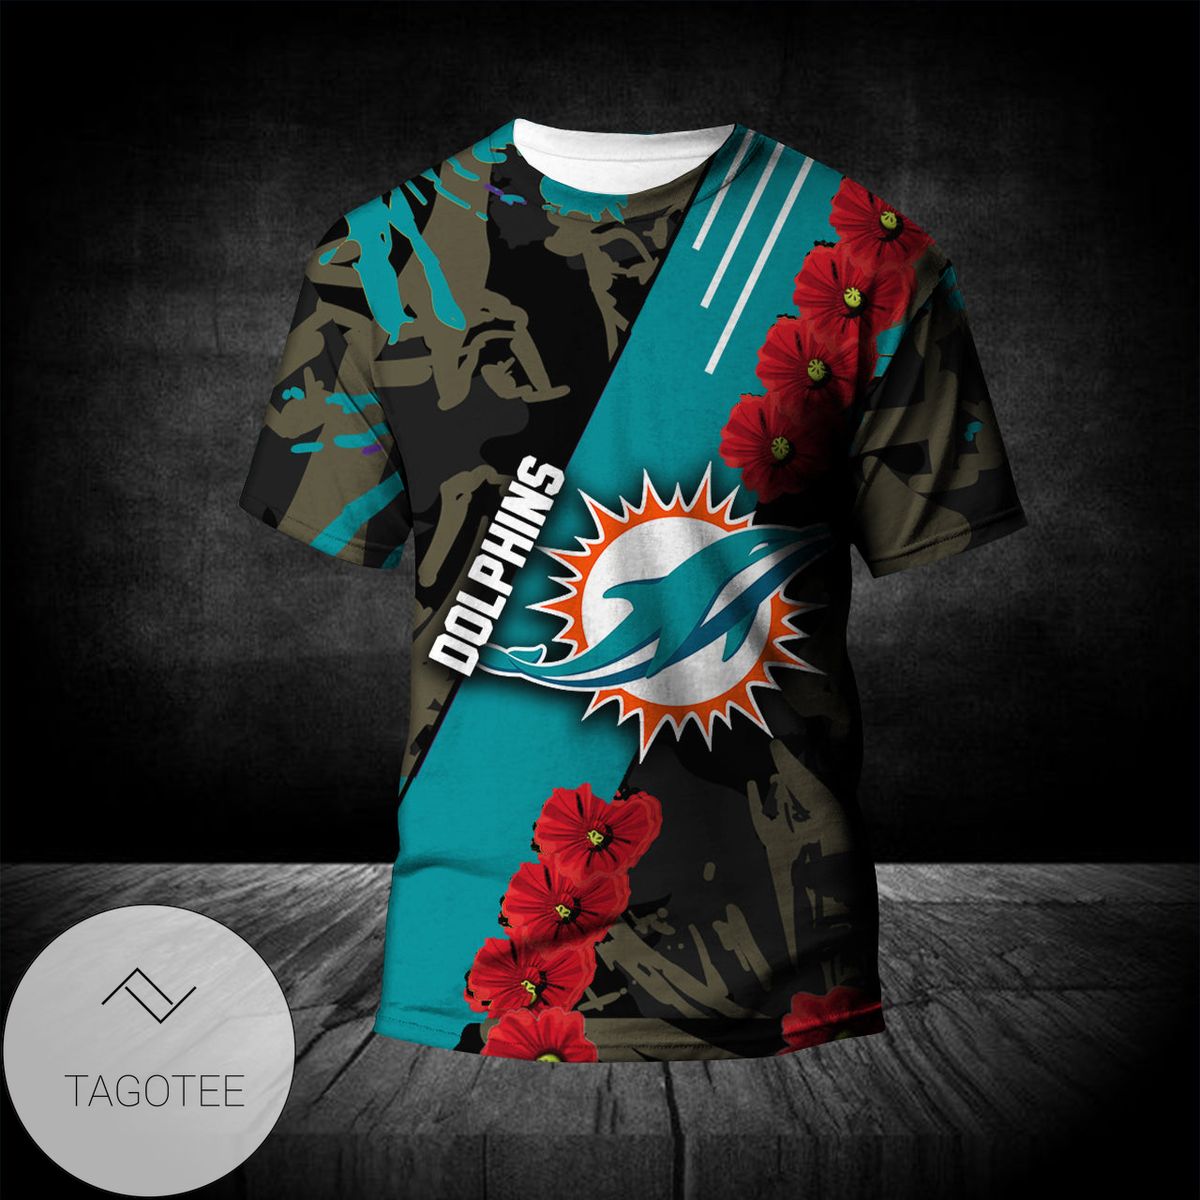 Miami Dolphins Shop - Miami Dolphins All Over Print T shirt Sport Style Keep Go on